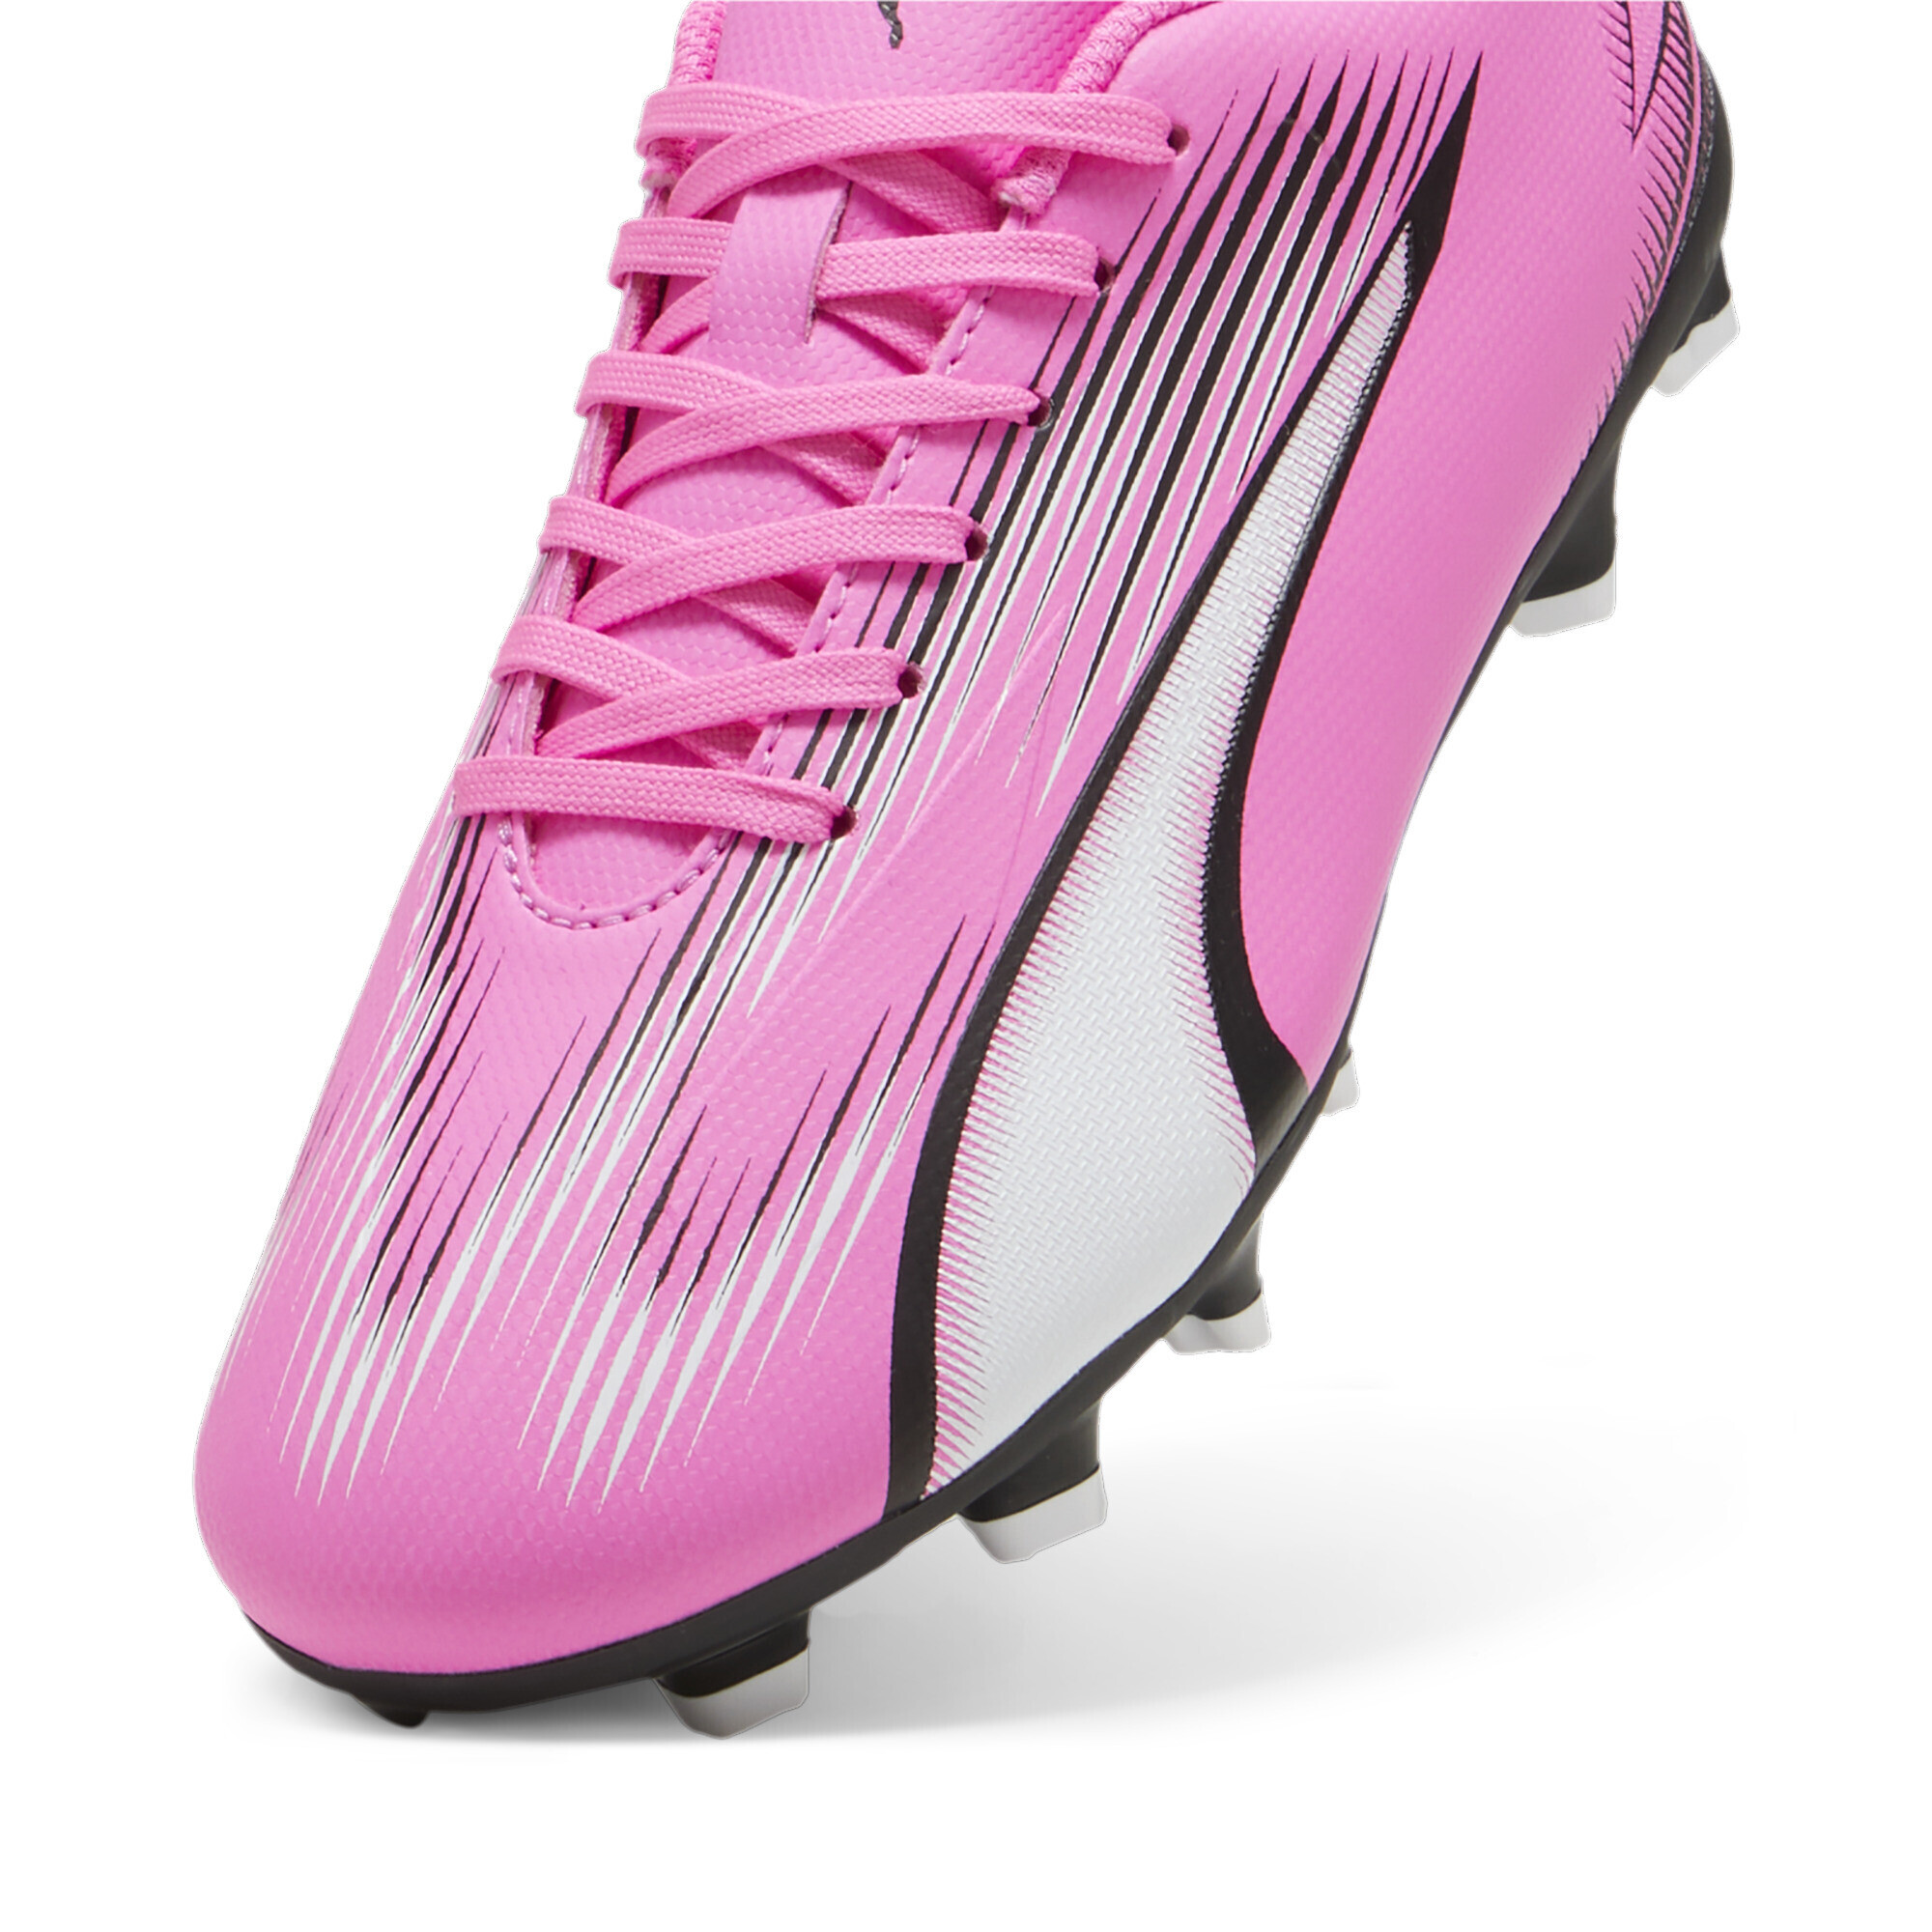 PUMA ULTRA PLAY FG/AG Youth Football Boots In Pink, Size EU 37.5